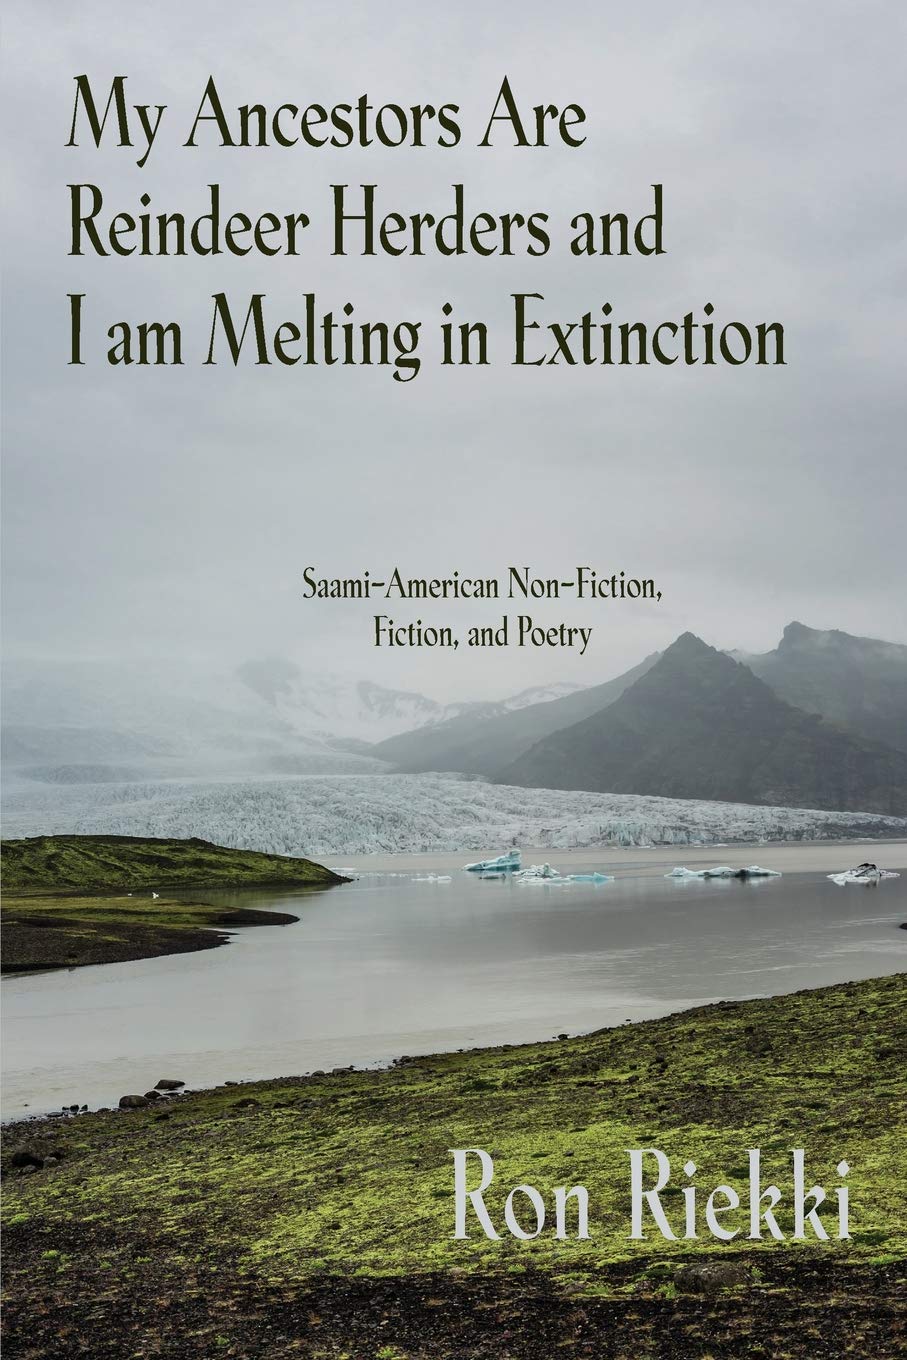 My Ancestors Are Reindeer Herders and I Am Melting In Extinction: Saami-American Non-Fiction, Fiction, and Poetry